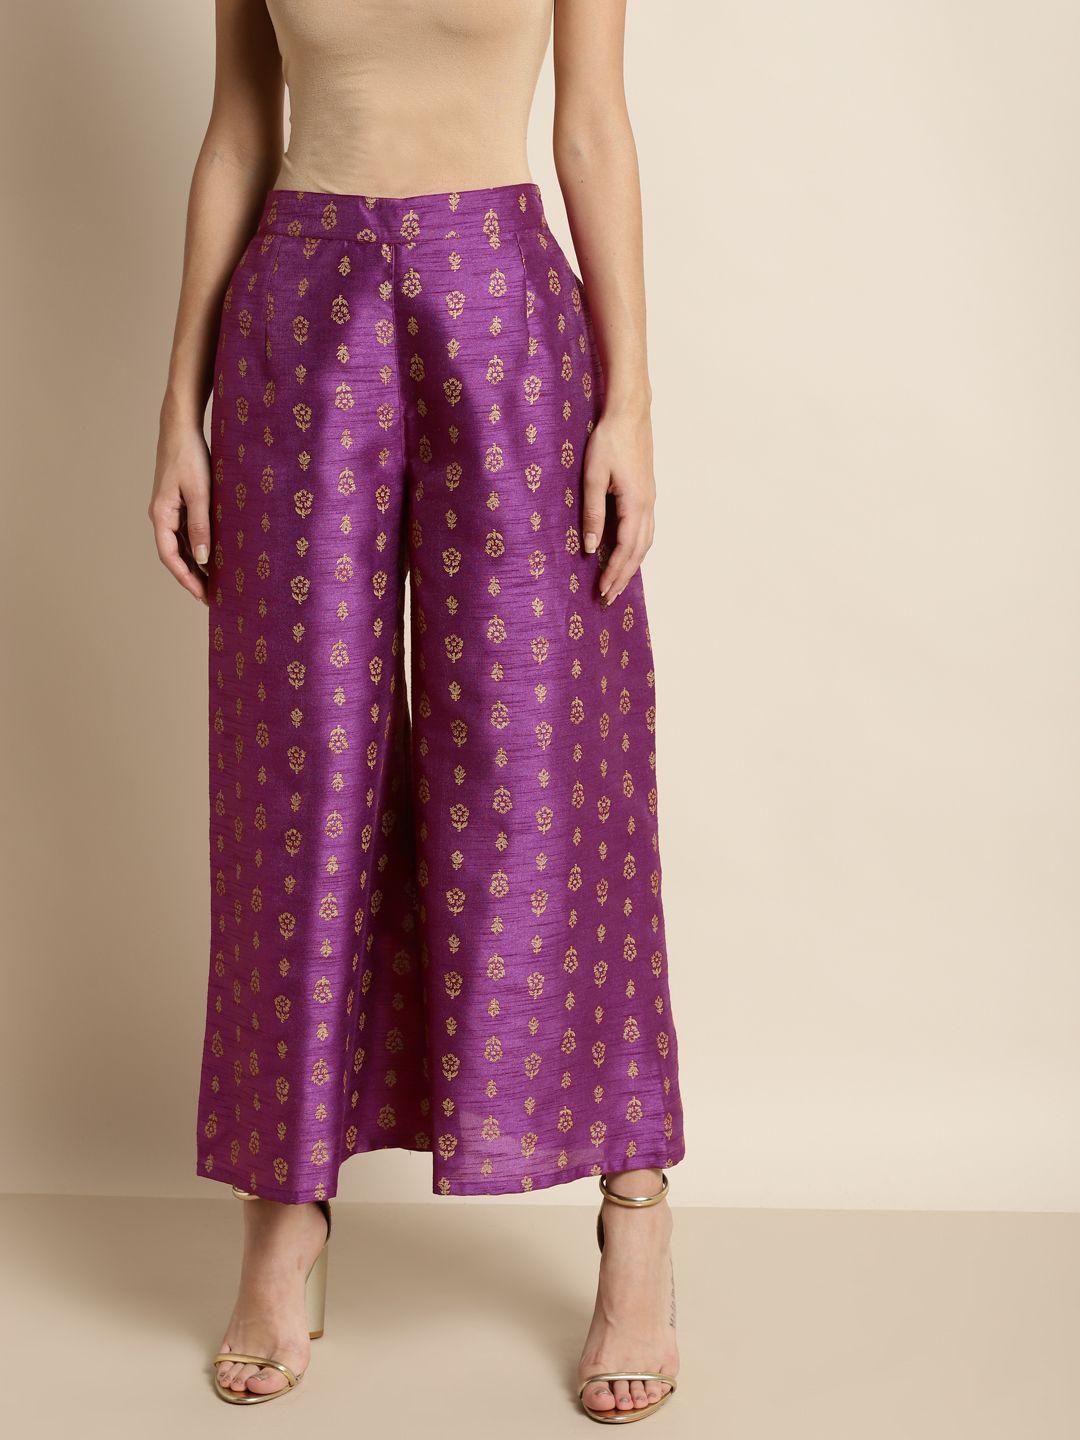 shae by sassafras women purple & gold-toned floral printed ankle length palazzos